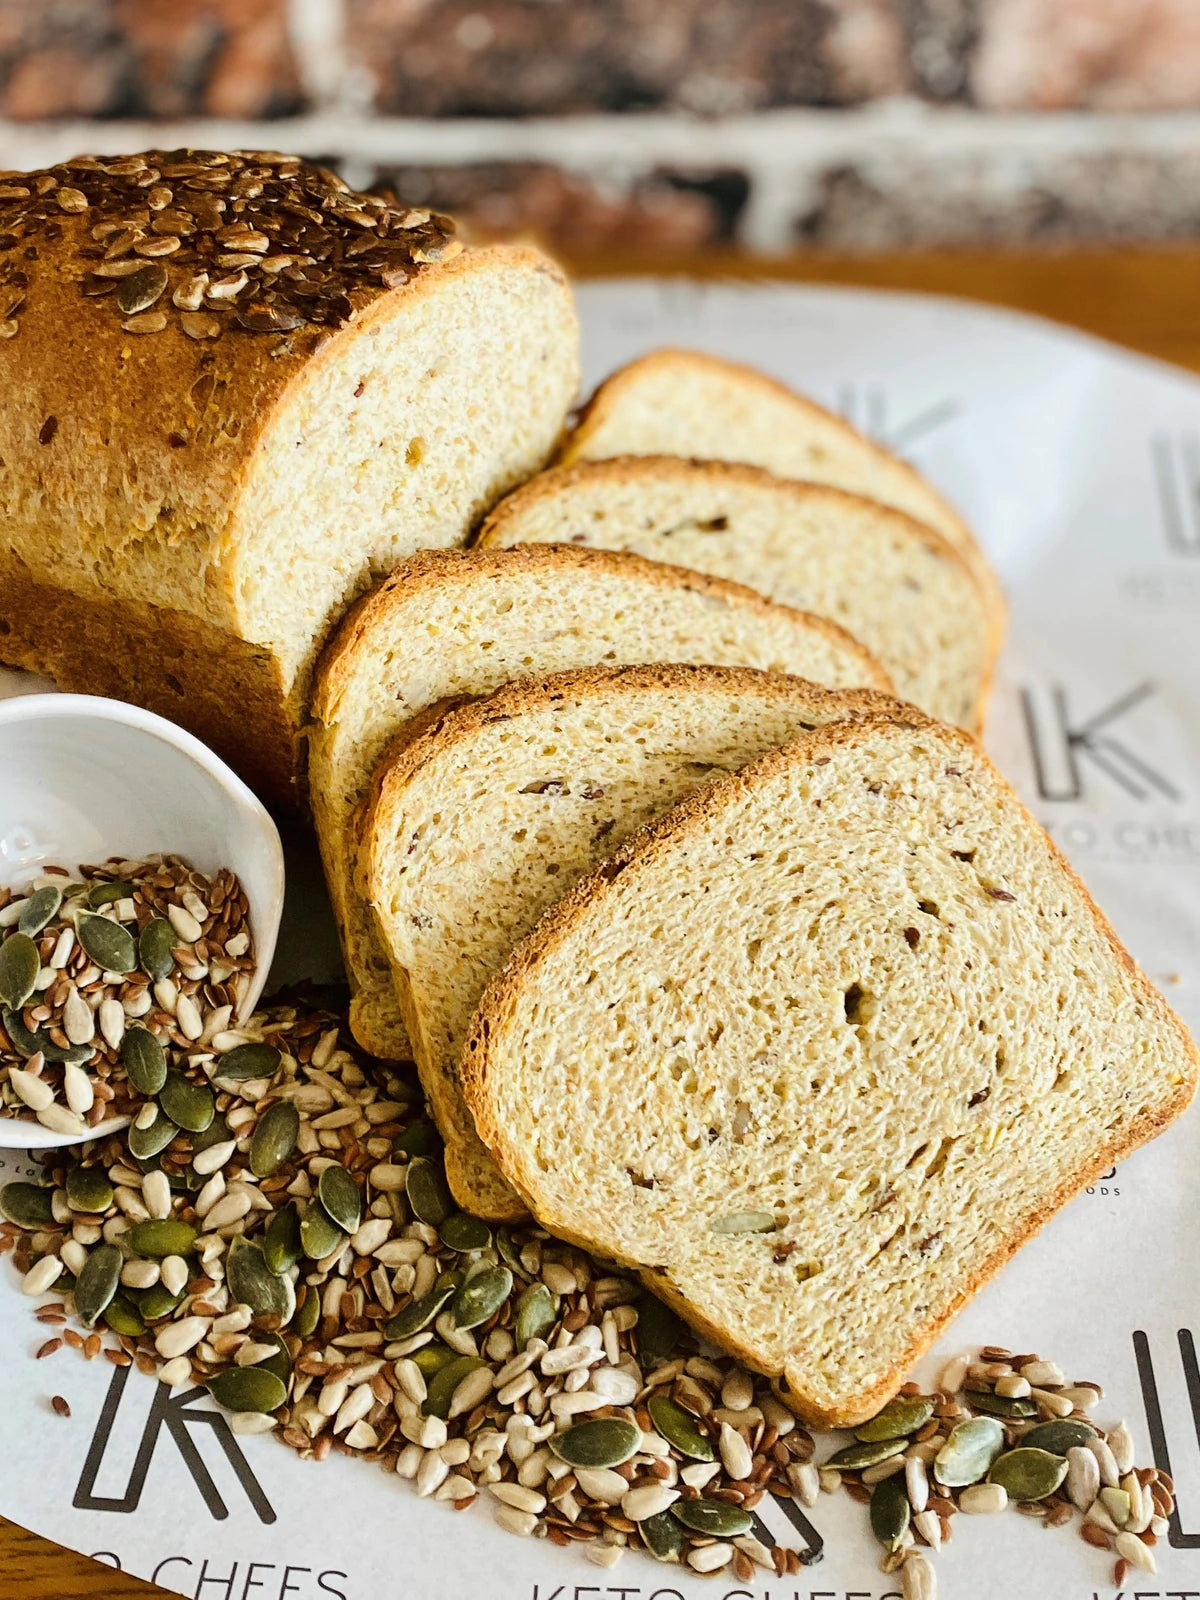 Ultra Low Carb Multiseed Rustic Loaf 600g